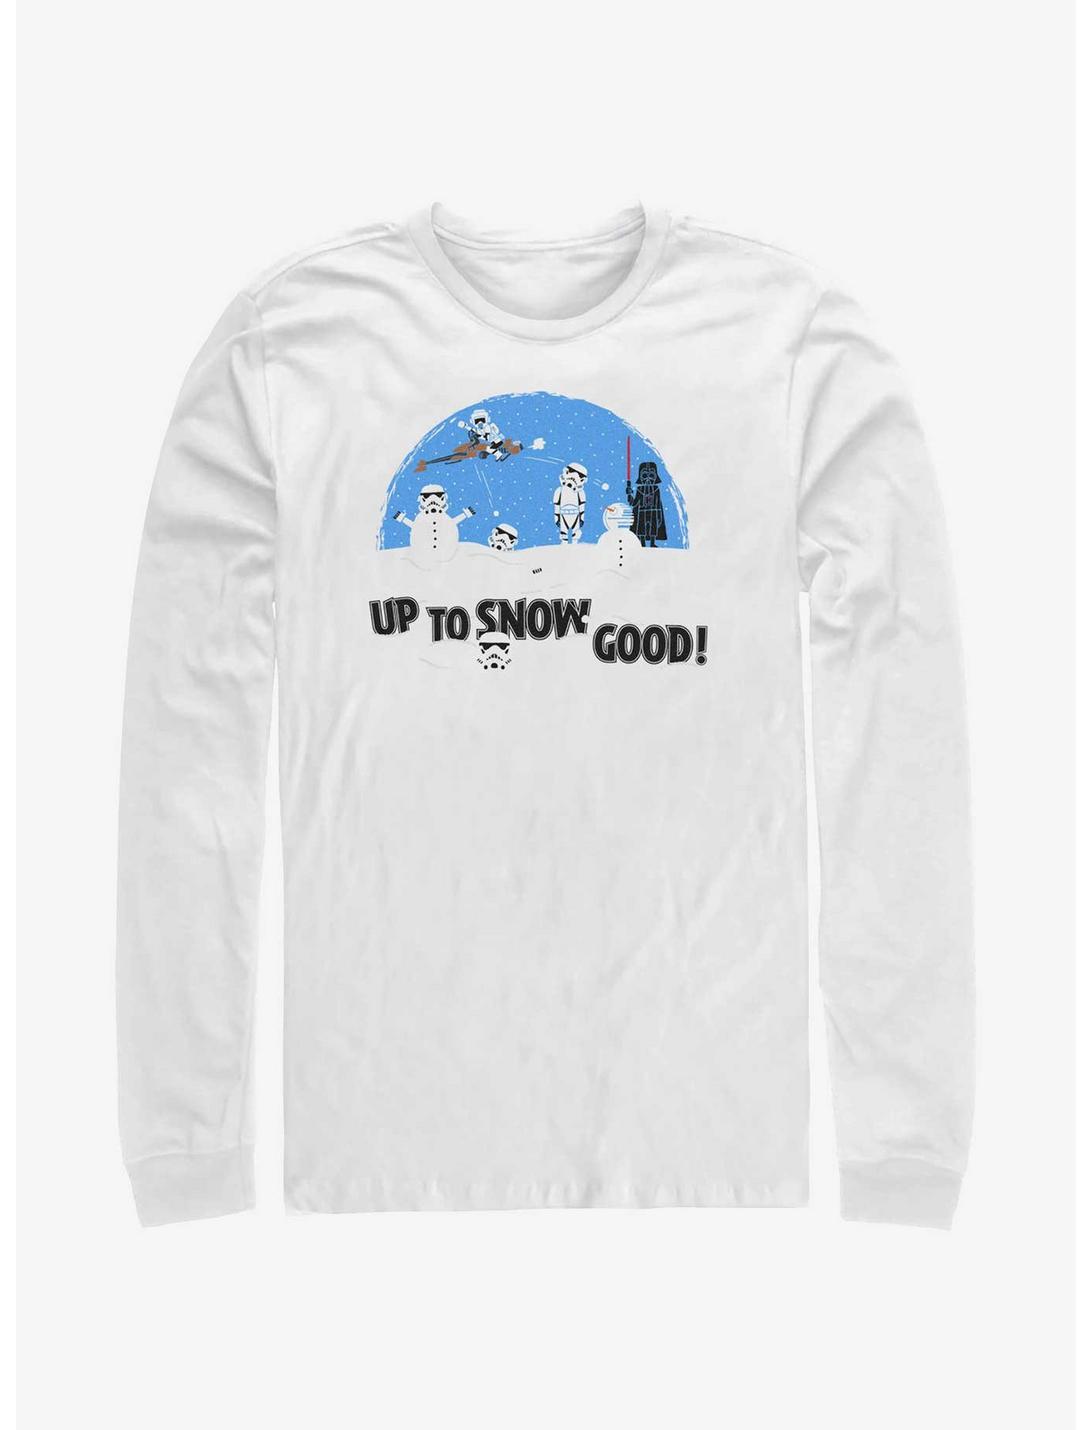 Star Wars Up To Snow Good Long-Sleeve T-Shirt, WHITE, hi-res